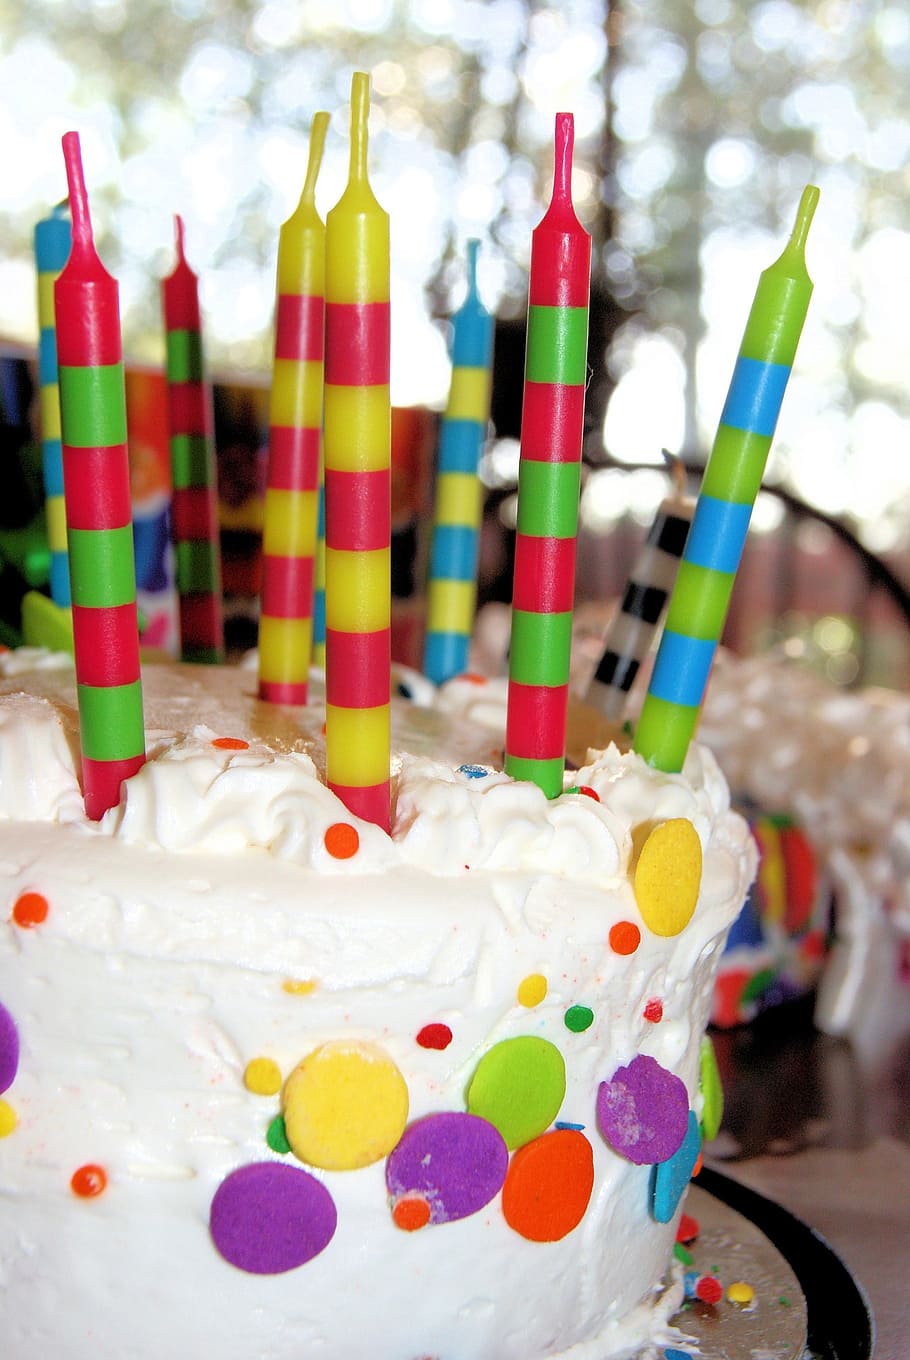 round, white, icing-covered icing, multicolored, candles, cake, birthday, vanilla, icing, candle